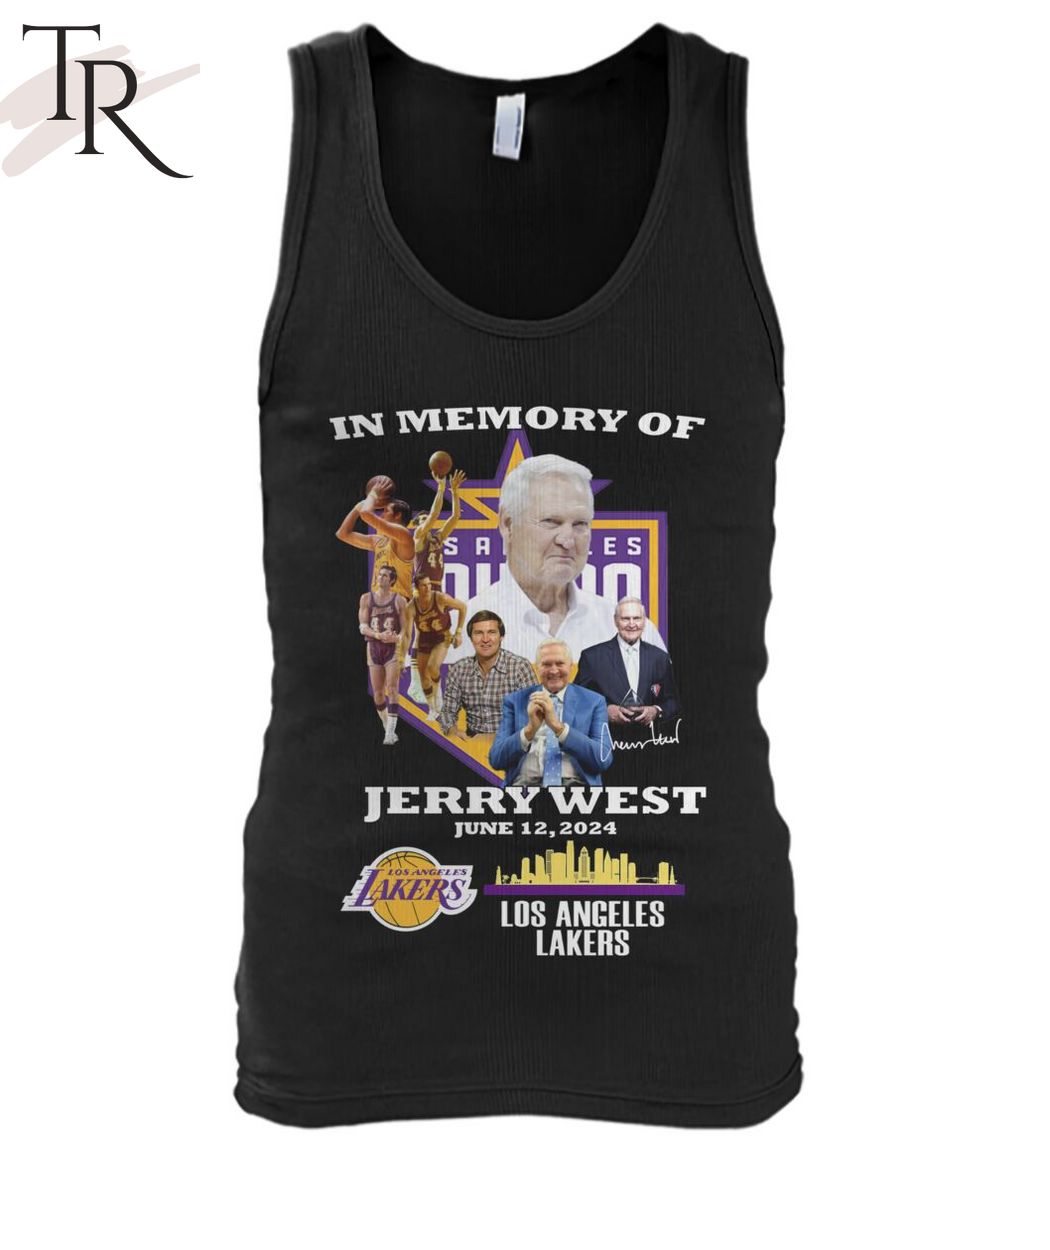 In Memory Of Jerry West June 12, 2024 Los Angeles Lakers T-Shirt